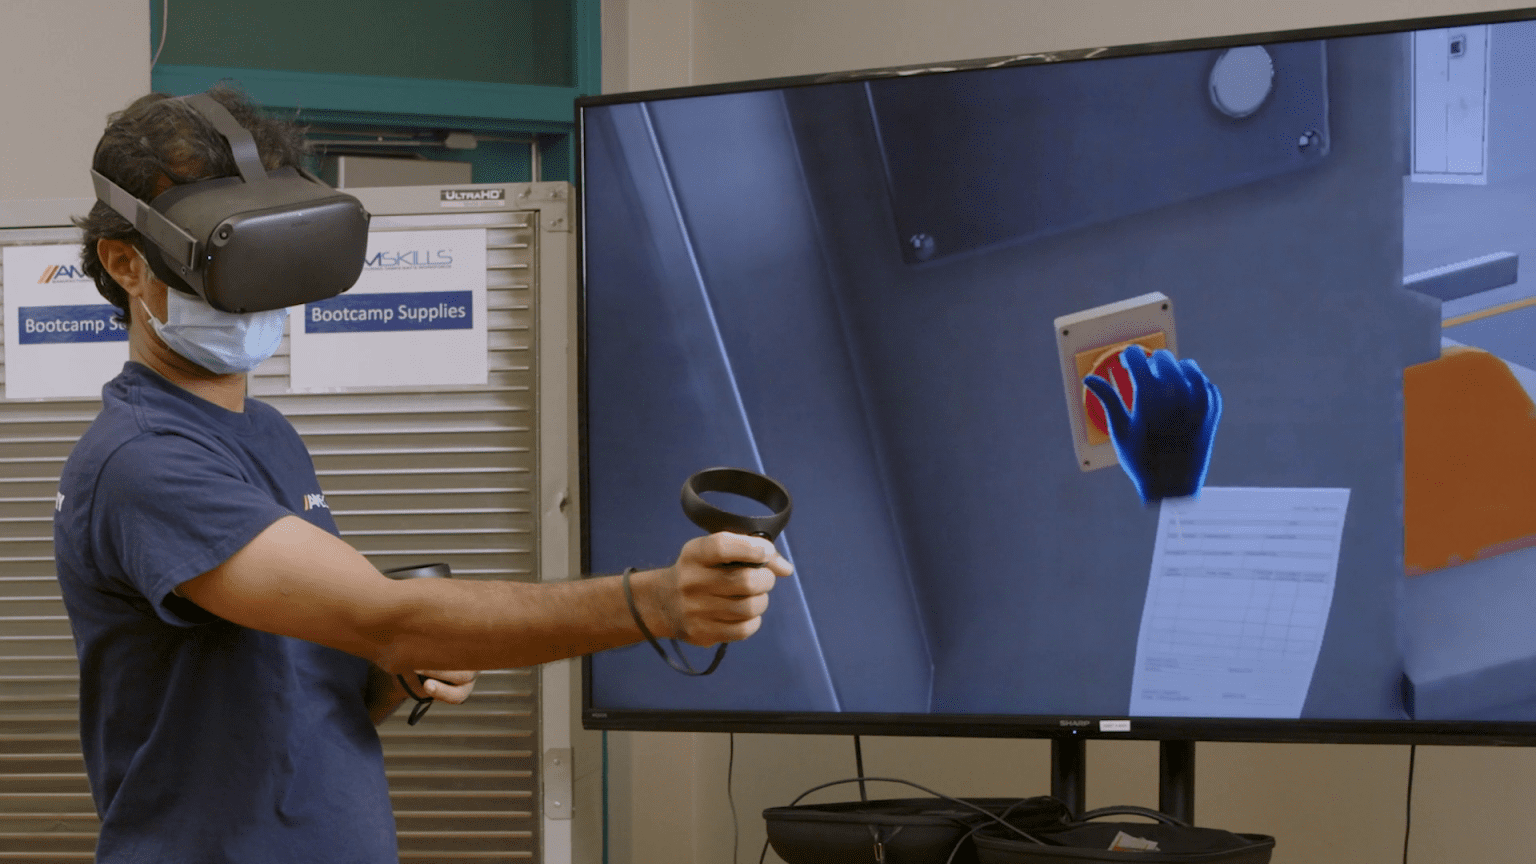 A student in a blue shirt using a VR headset and hand controls; a monitor screen in the same shot shows a VR hand in a simulation.